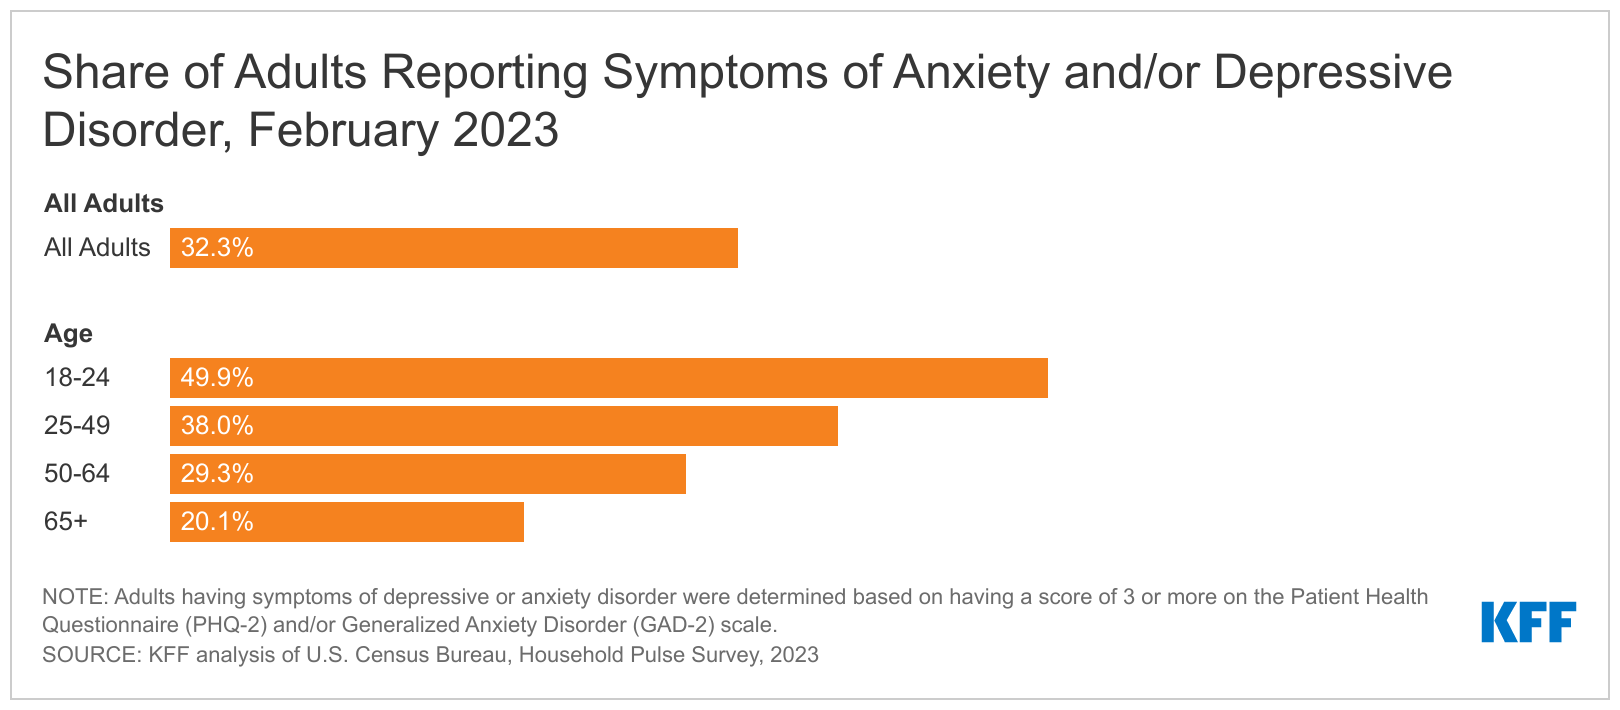 Anxiety and depression are increasing as the pandemic goes on